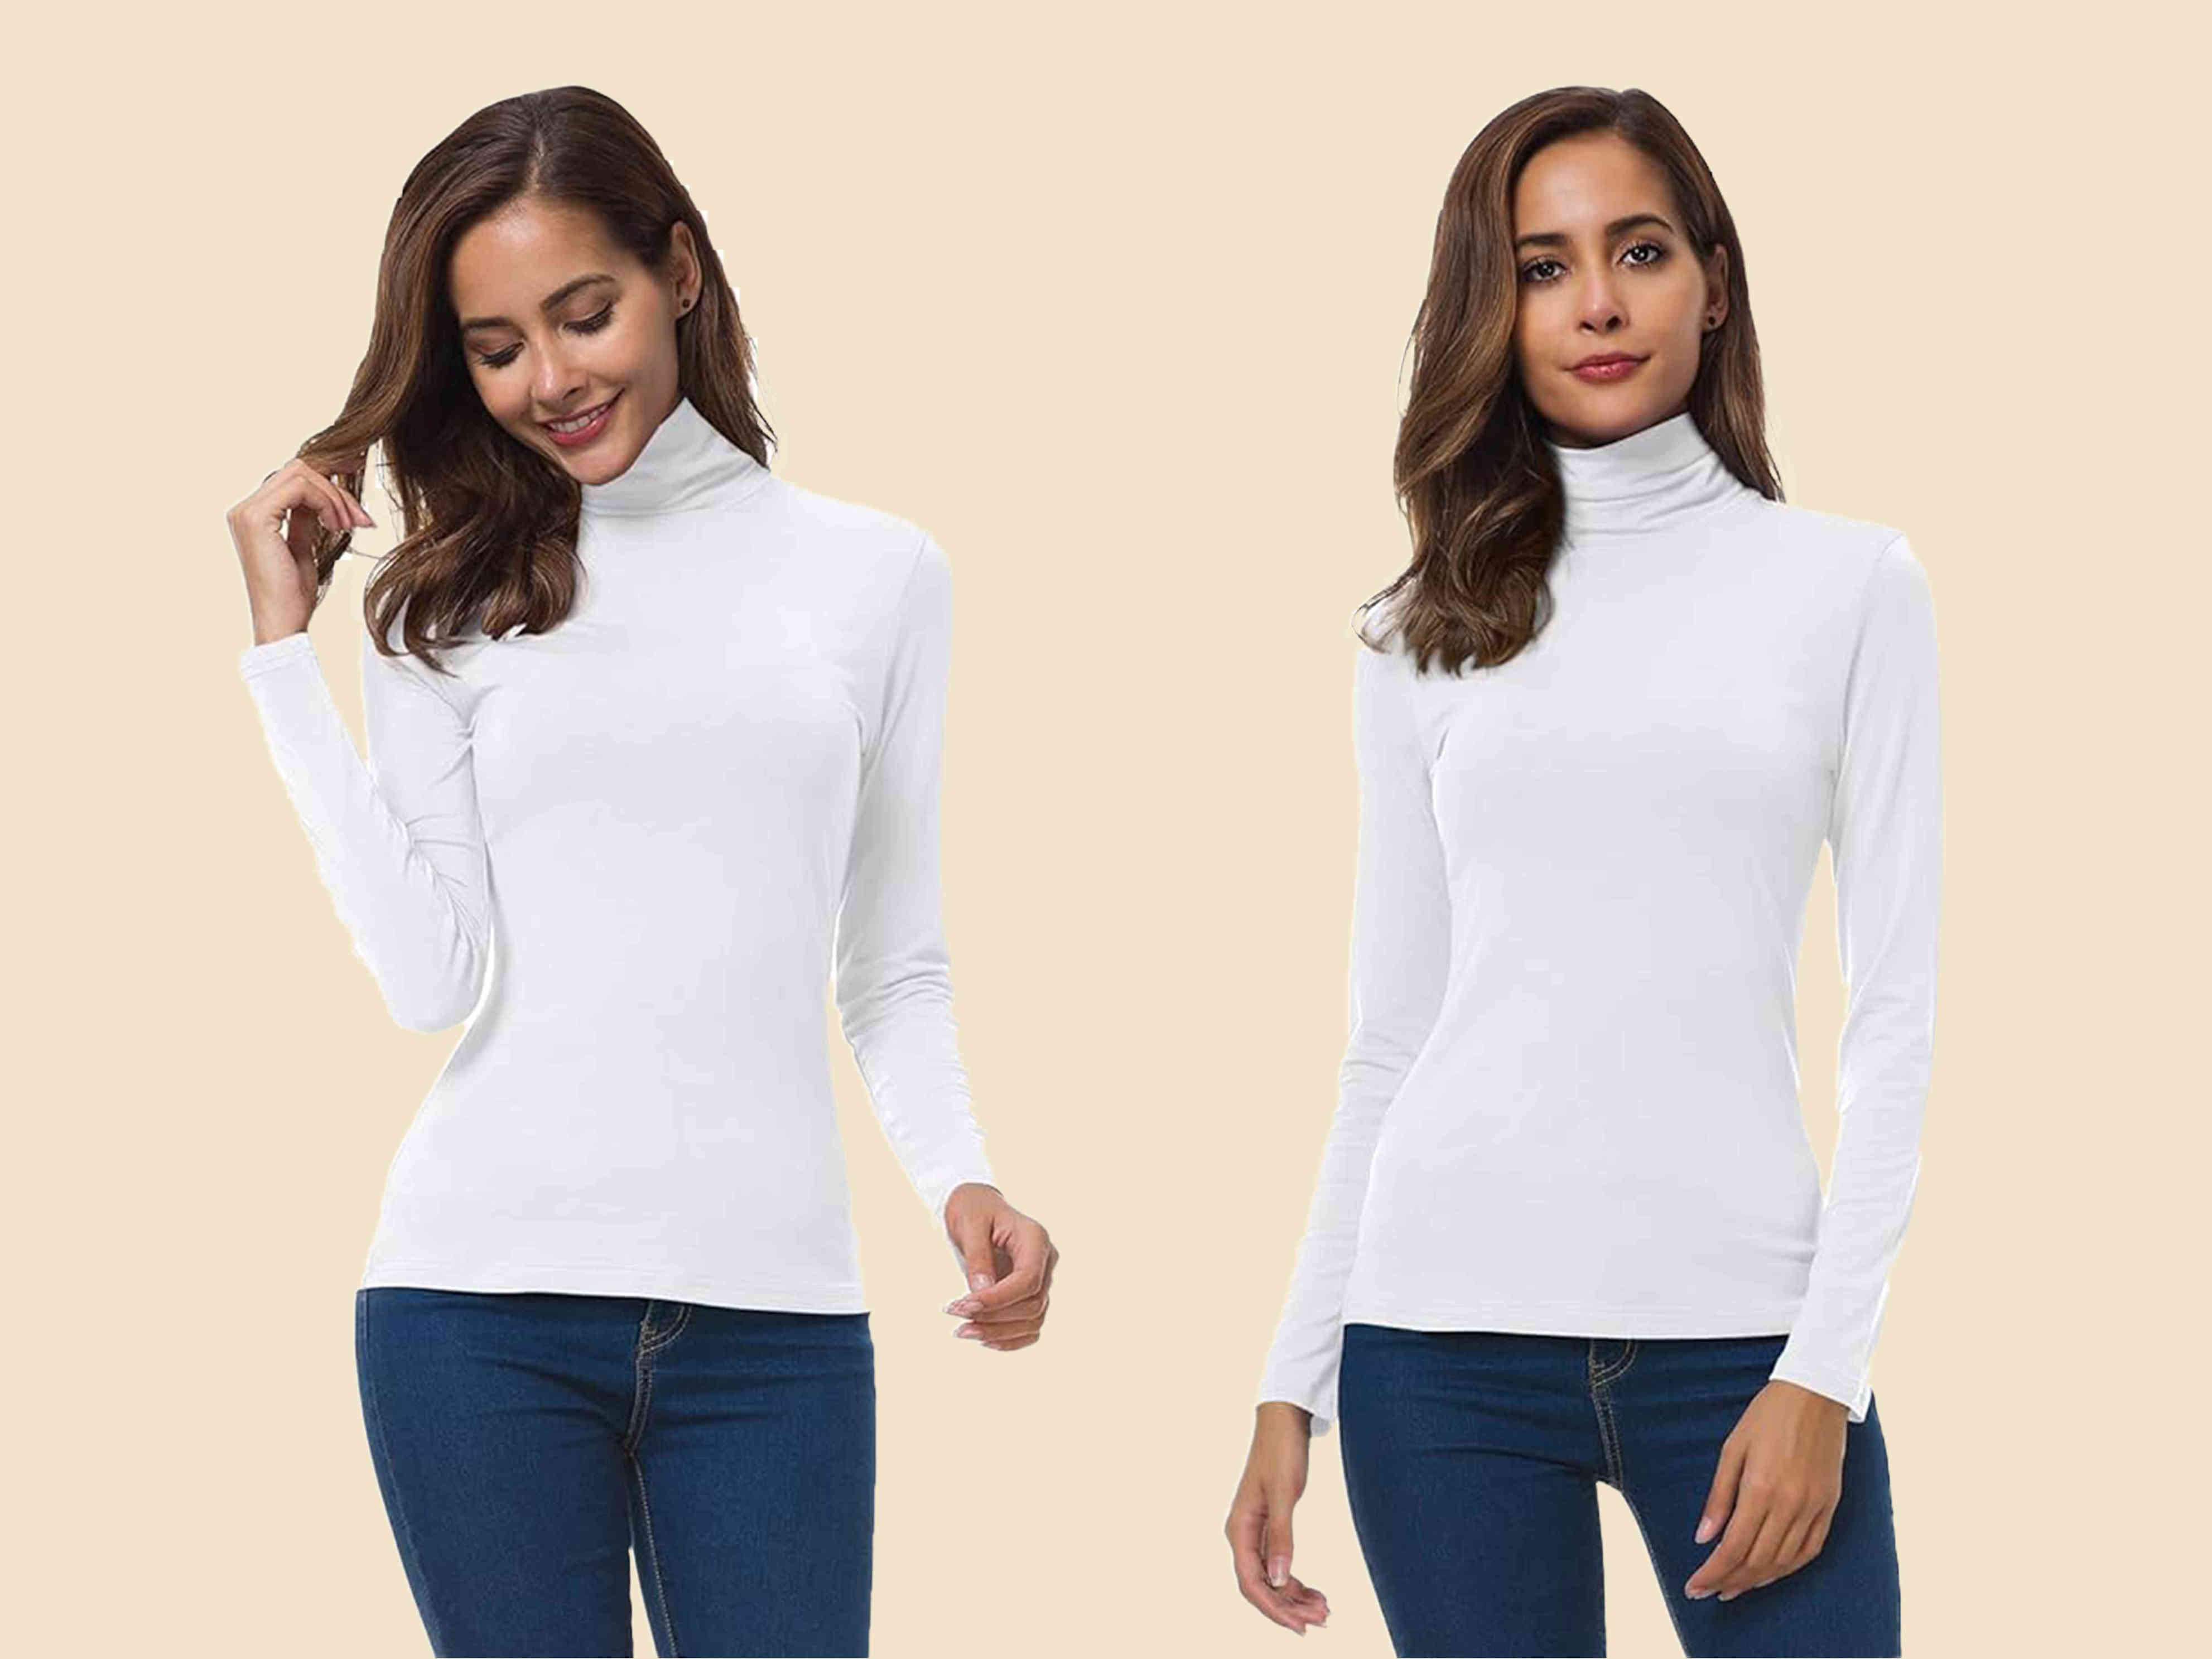 Amazon Shoppers Say They Wear This $15 Winter Wardrobe Staple “Nonstop”